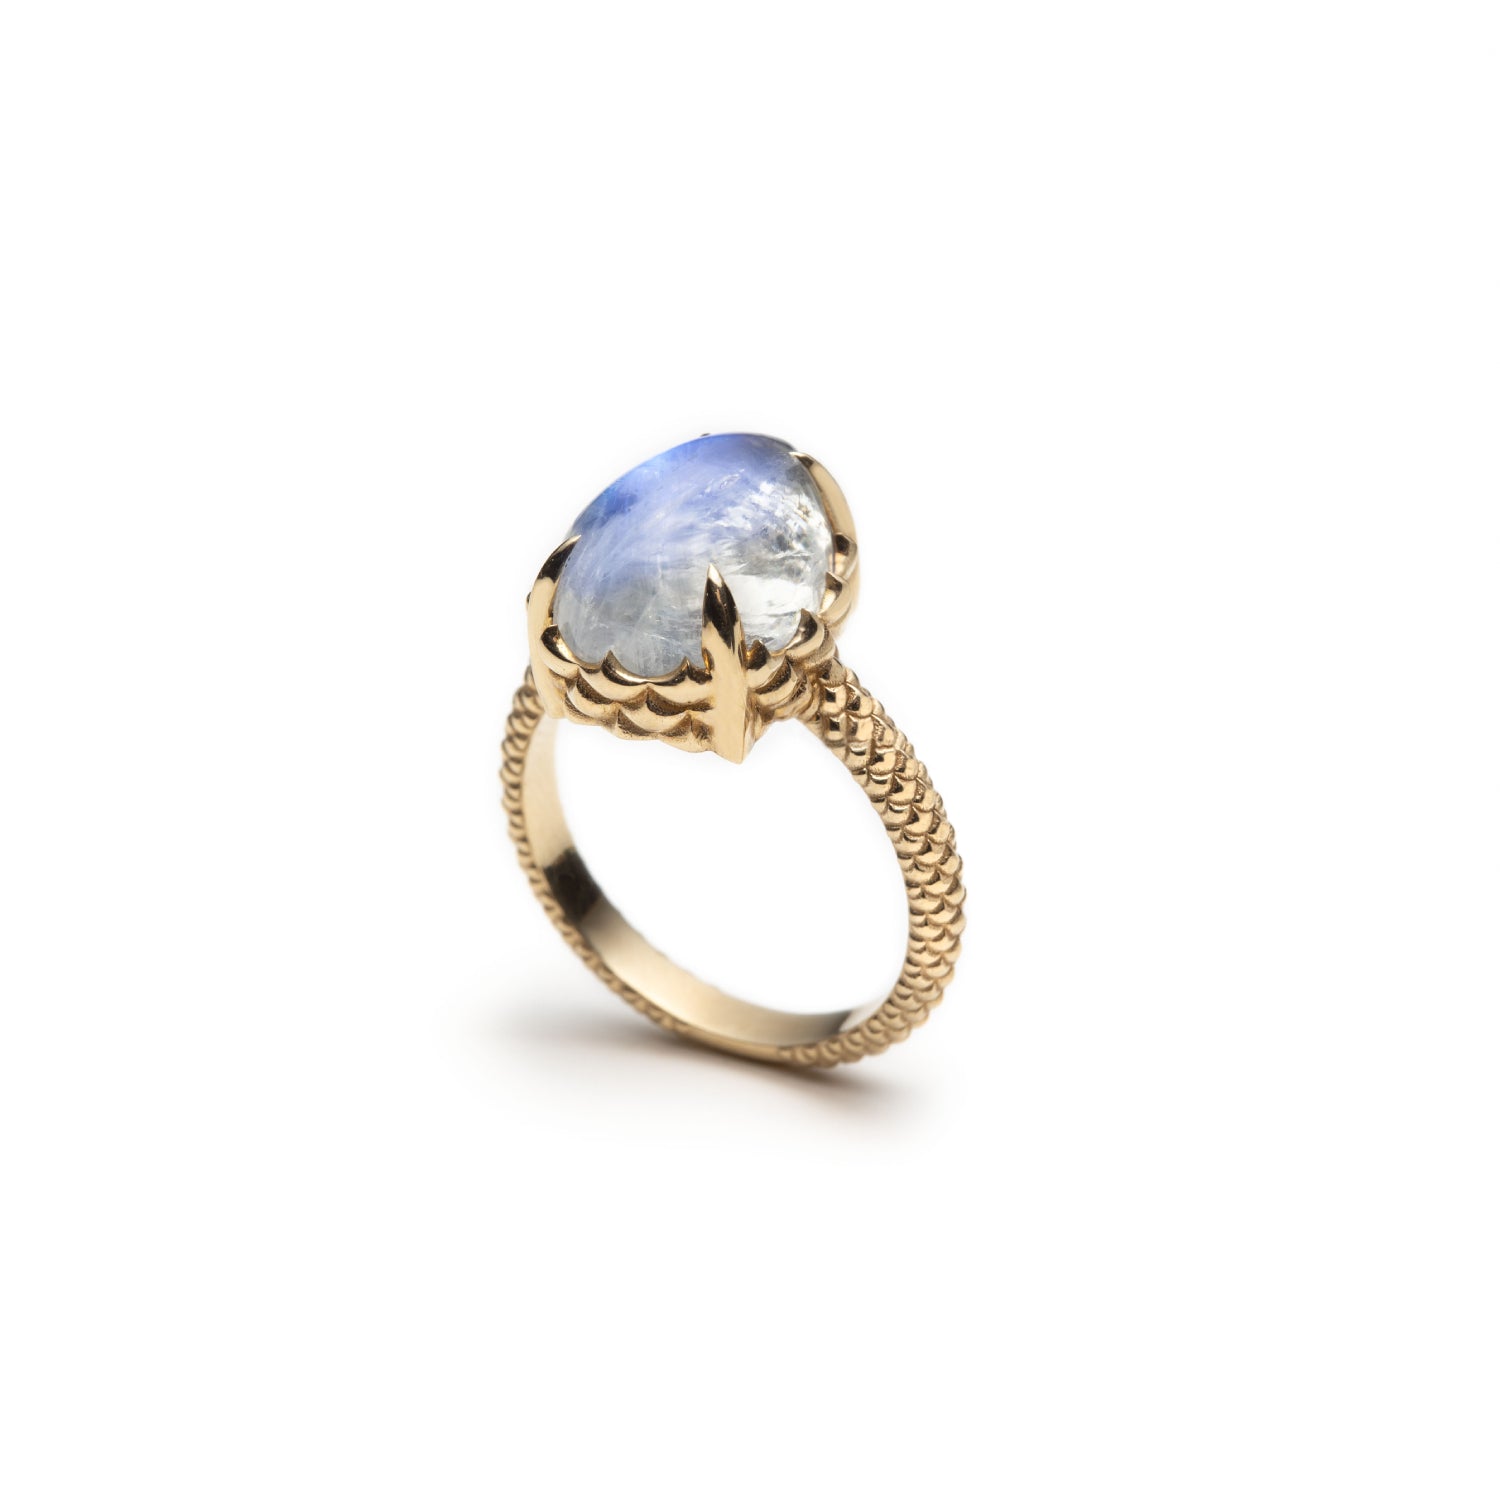 Lepia Pear-Shaped Cabochon Cut Moonstone Ring Side View